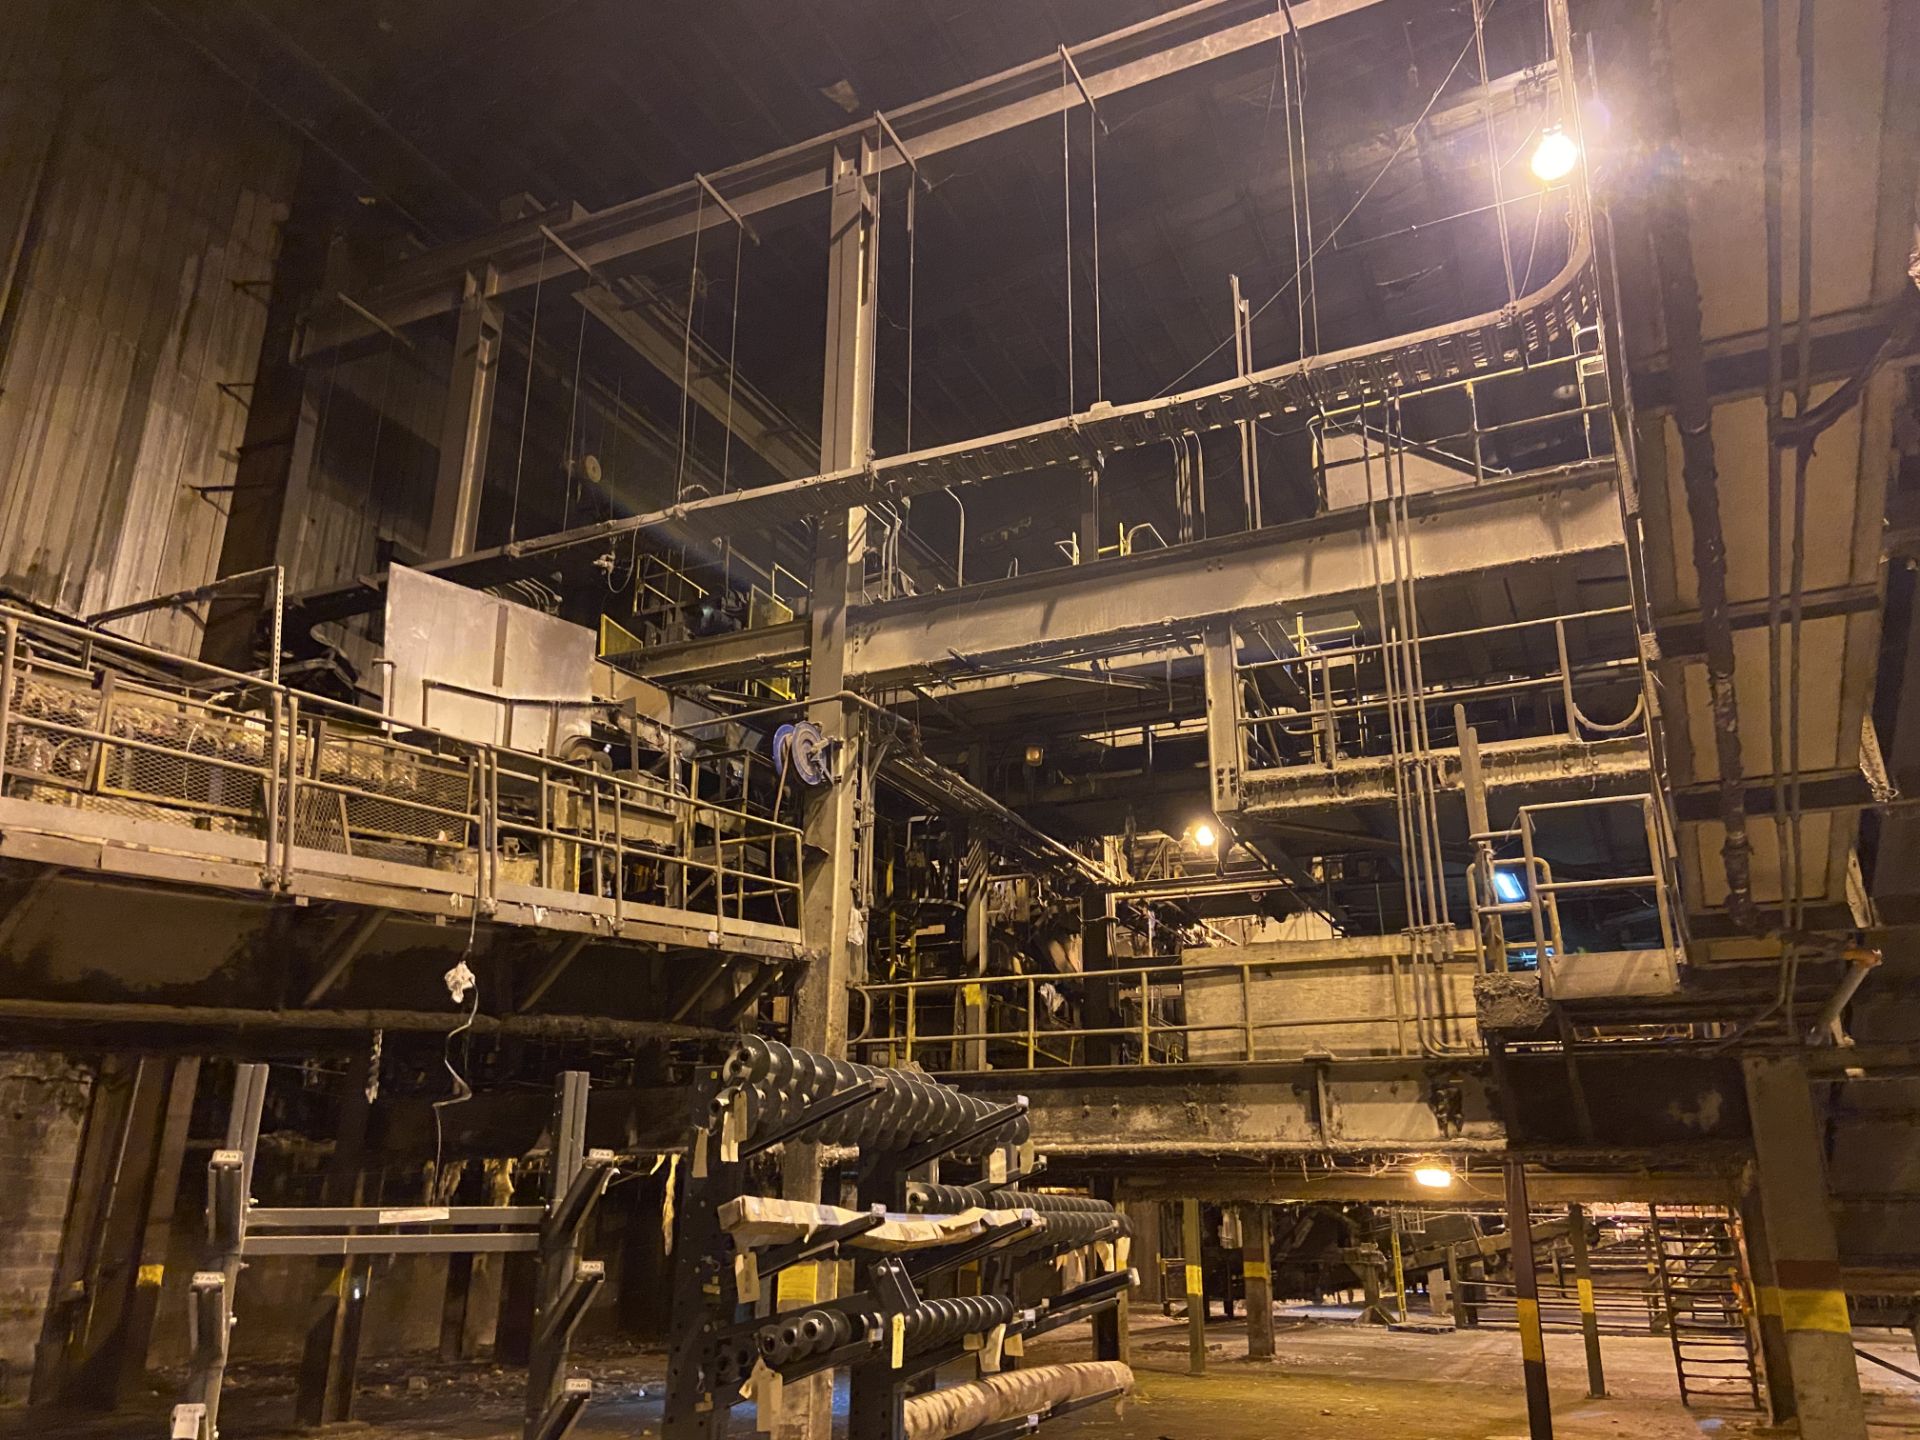 Mezzanines and Connected Conveyor (Cut off at Building Exterior), Rigging Fee: $25,000 - Image 5 of 11